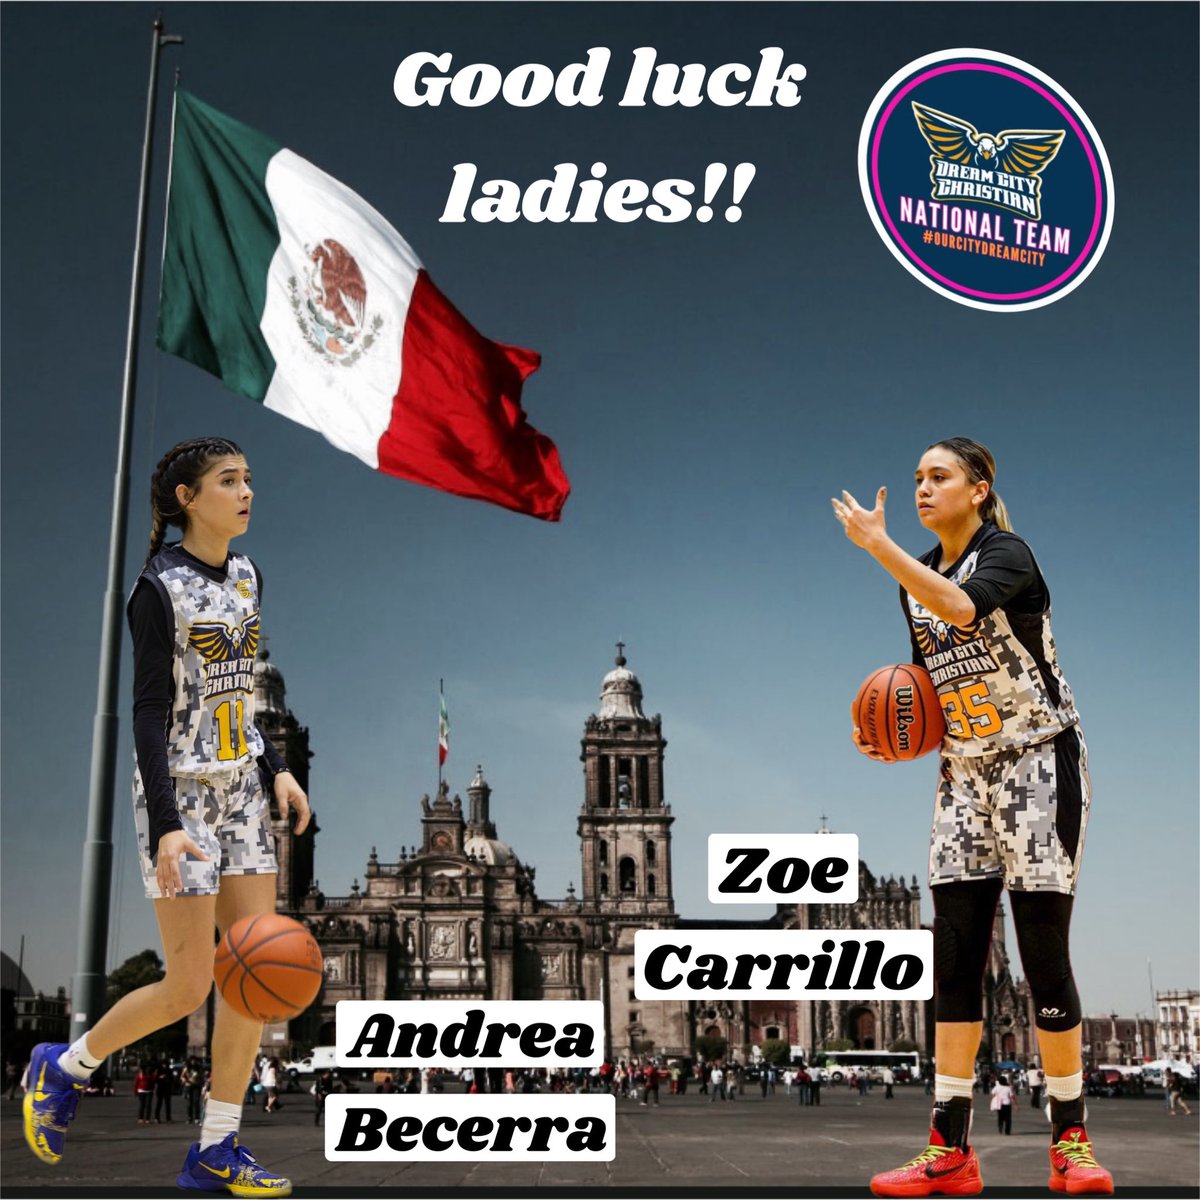 DCCGirlsHoops is proud to have two players invited to try out for Team Mexico! @dreabecerra13 and @zoballin35 . Join us in praying for both of them for a successful tryout! #ourcitydreamcity